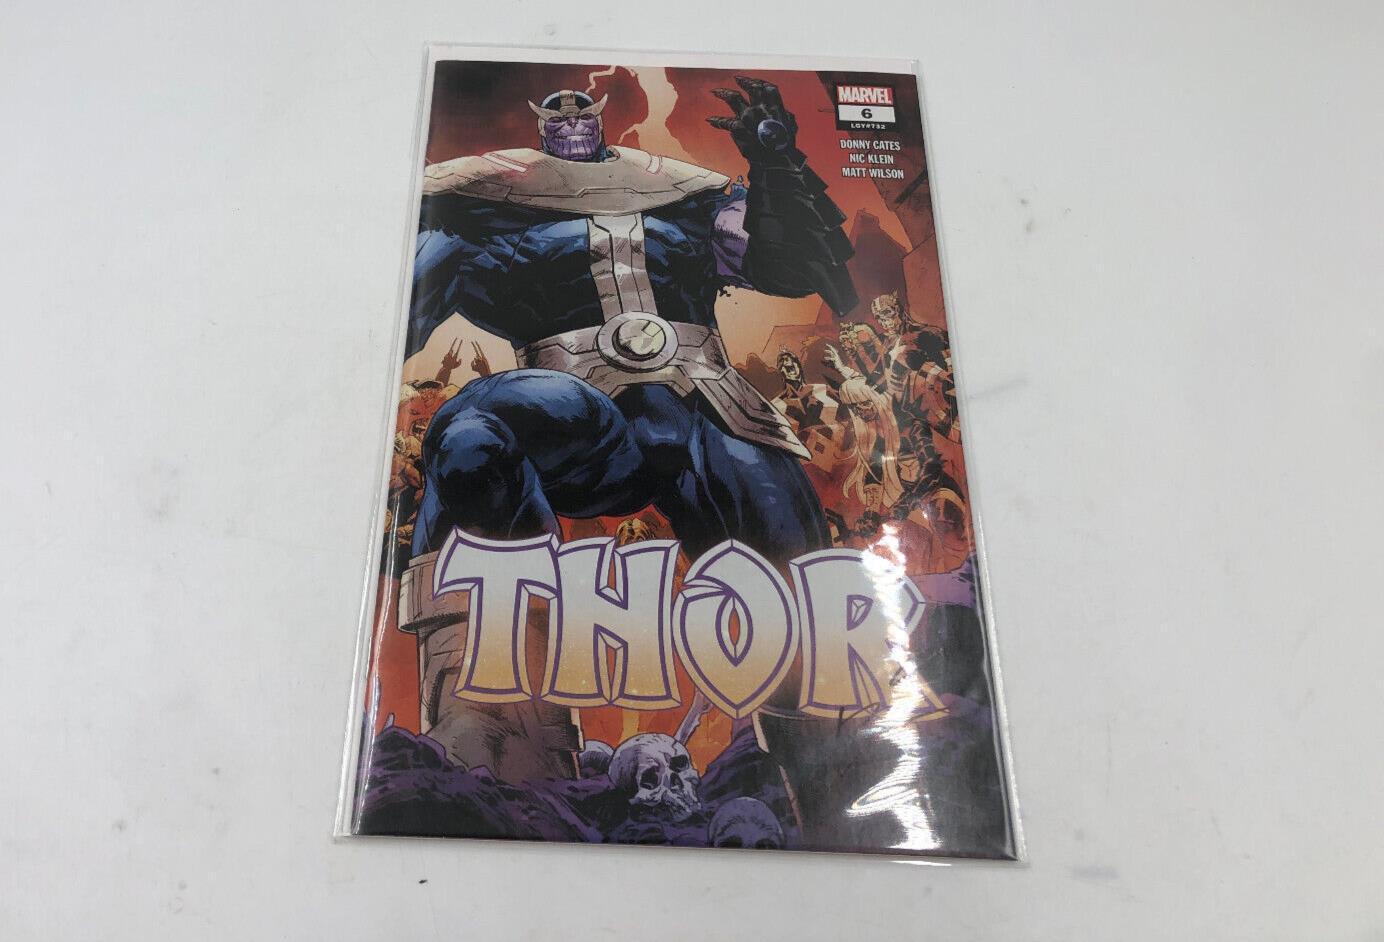 Thor #6 2nd Print Wraparound Donny Cates Black Winter Signed by Cates with COA